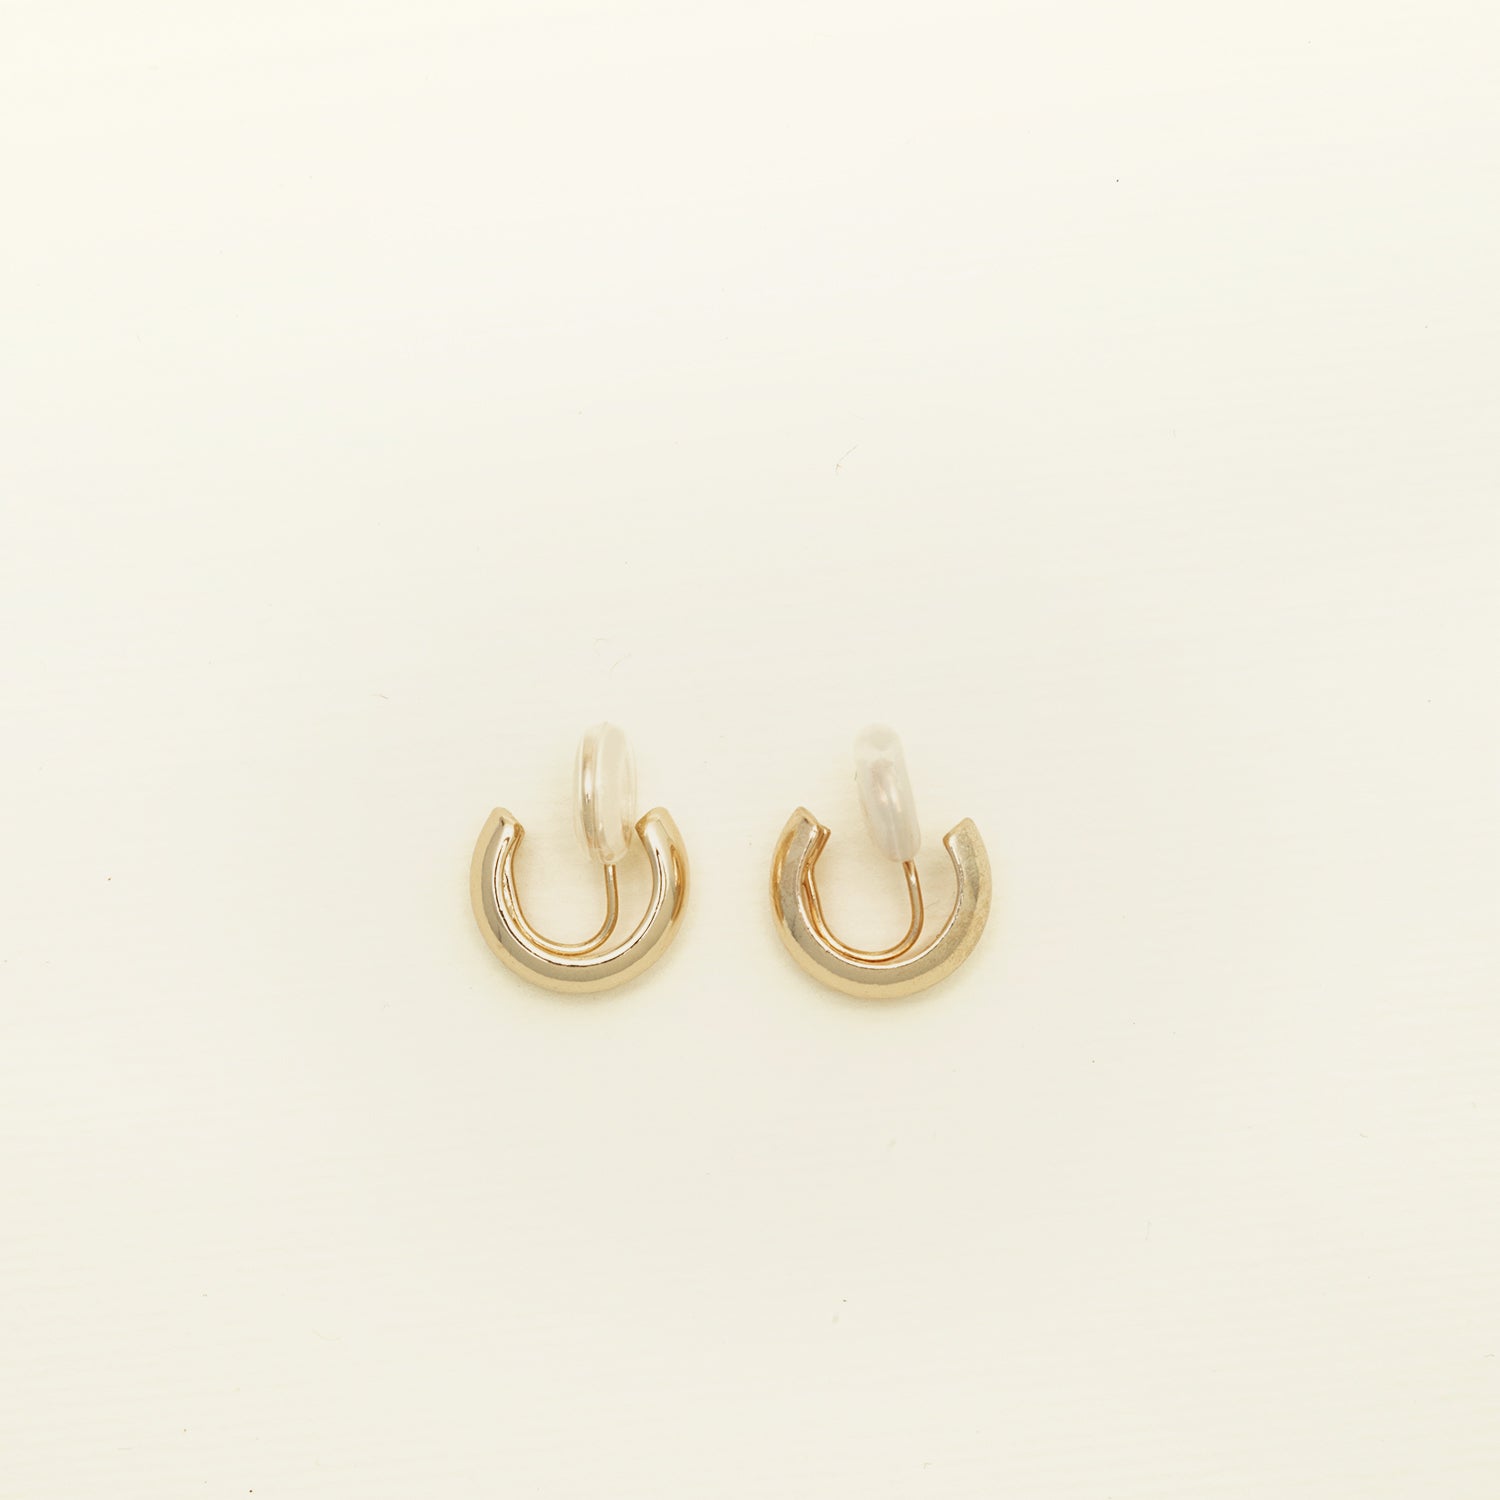 Image of the Simple Gold Huggie Clip-On Earrings provide a medium secure hold, making them perfect for all ear types. With adjustable padding for extra comfort, these earrings can be worn for up to 24 hours with ease.